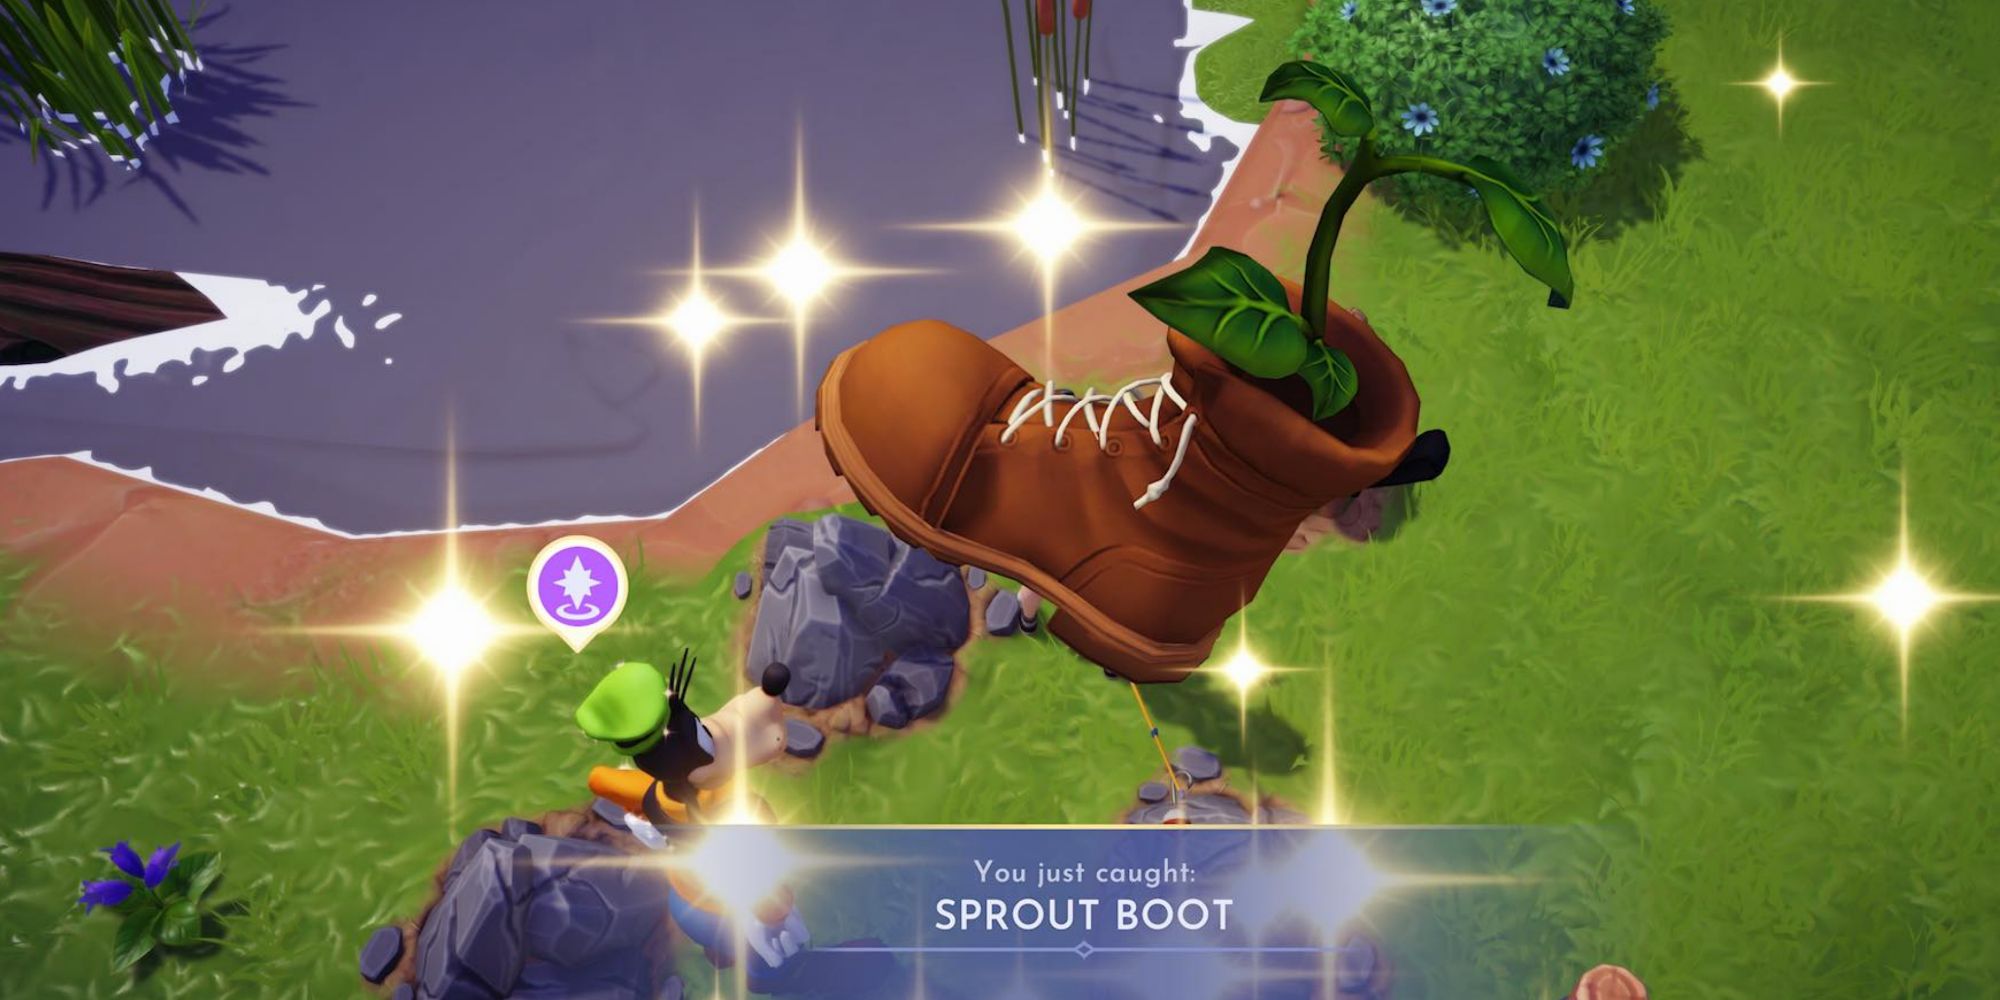 catching sprout boot in the water